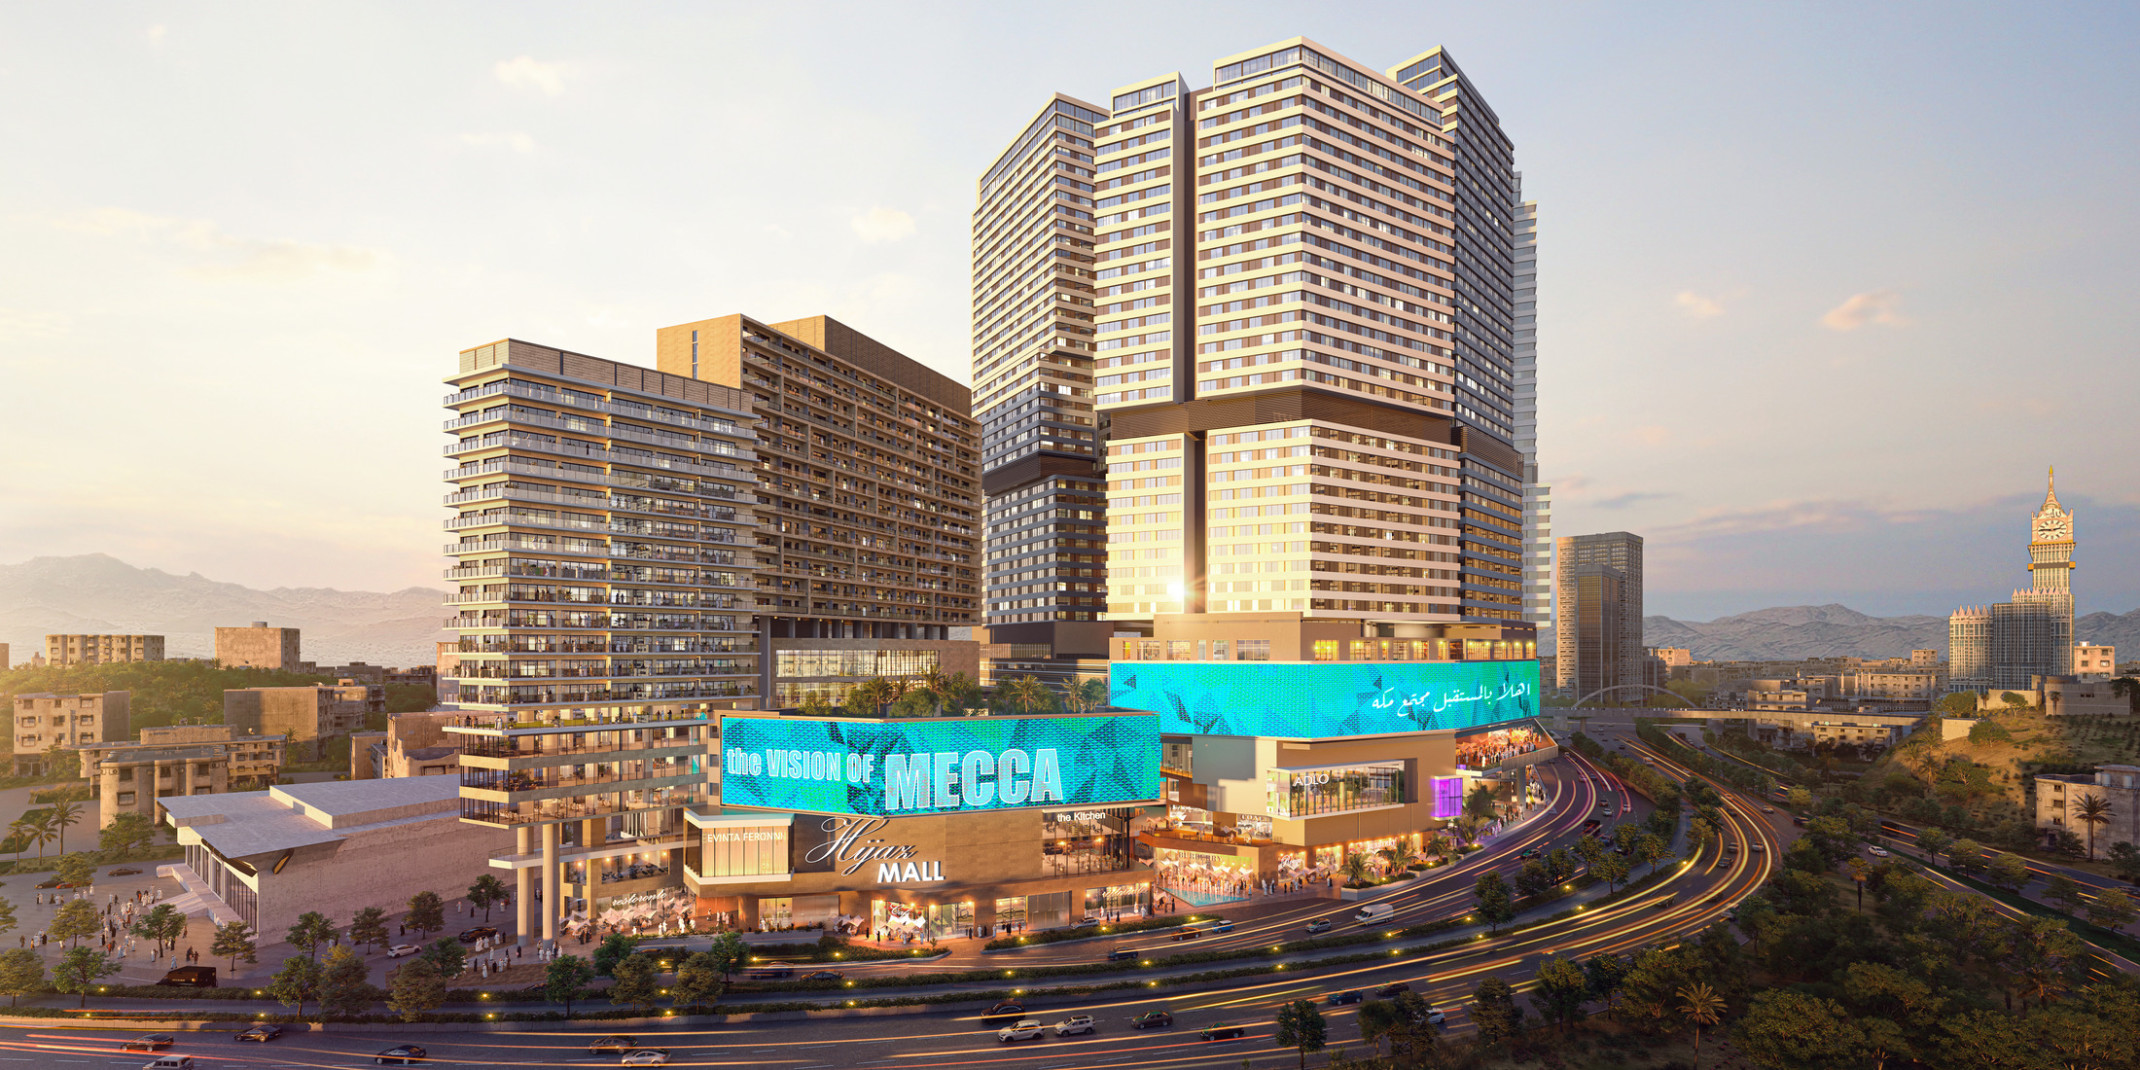 Al Hijaz, a midrise shopping center with lighted display along top with garden on left roof and tall buildings behind